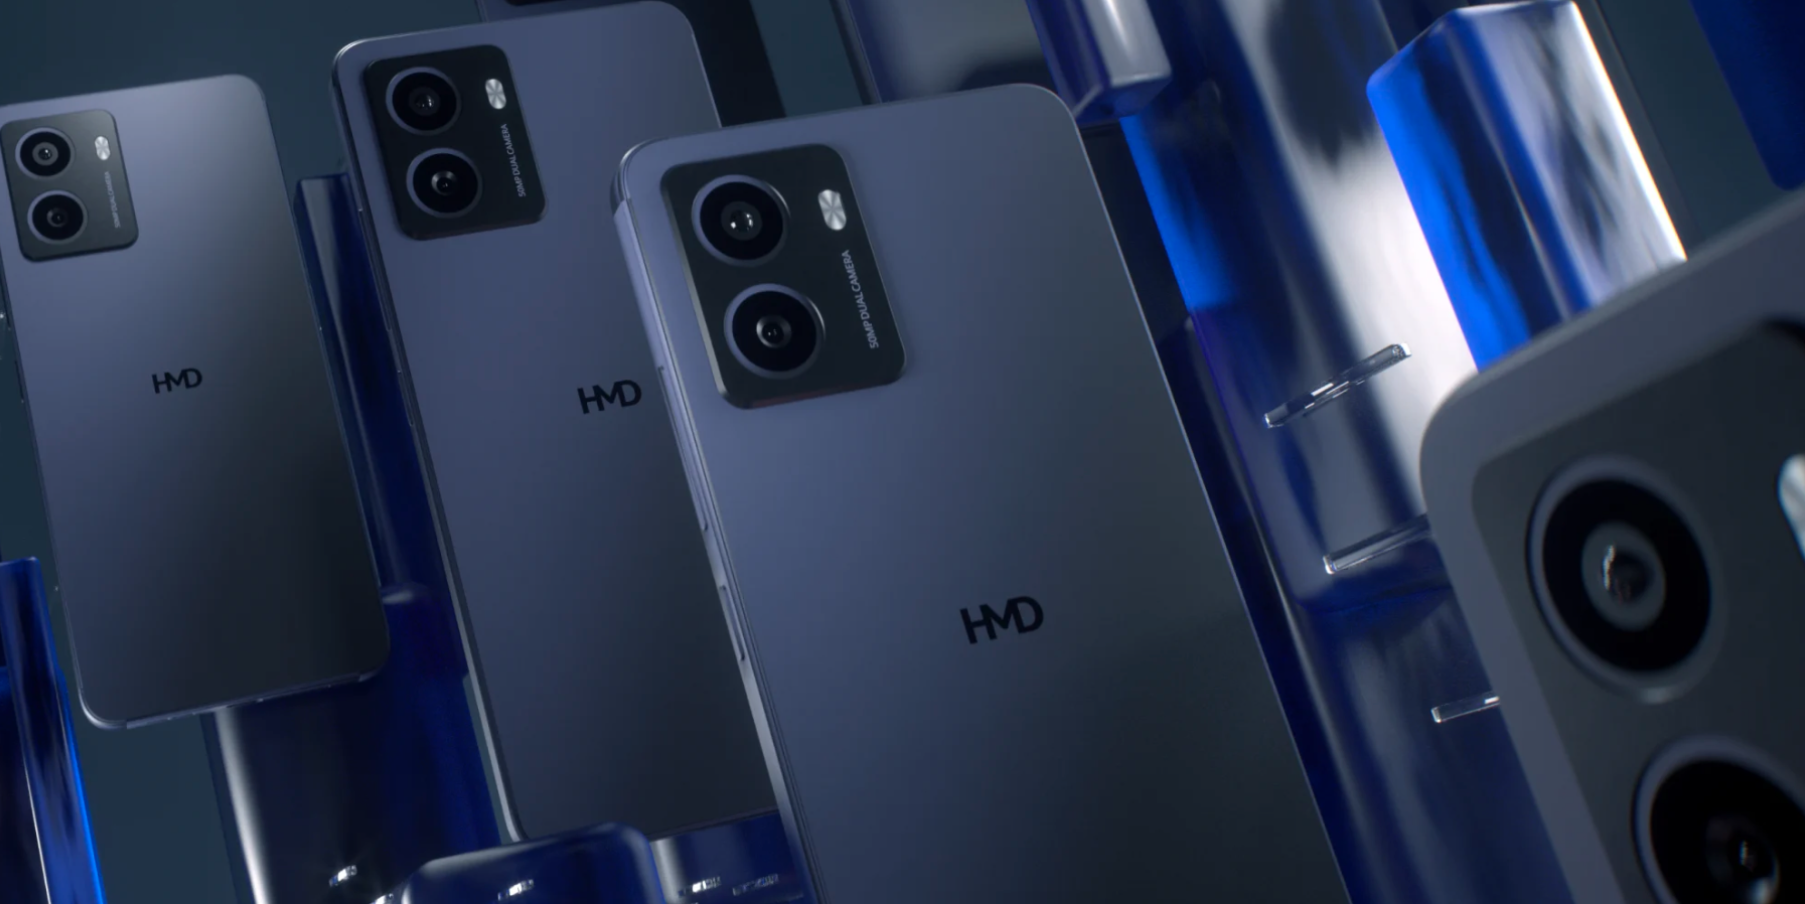 HMD Pulse+: an improved version of the HMD Pulse with a 50 MP camera, 8 GB RAM and a price of 160 euros